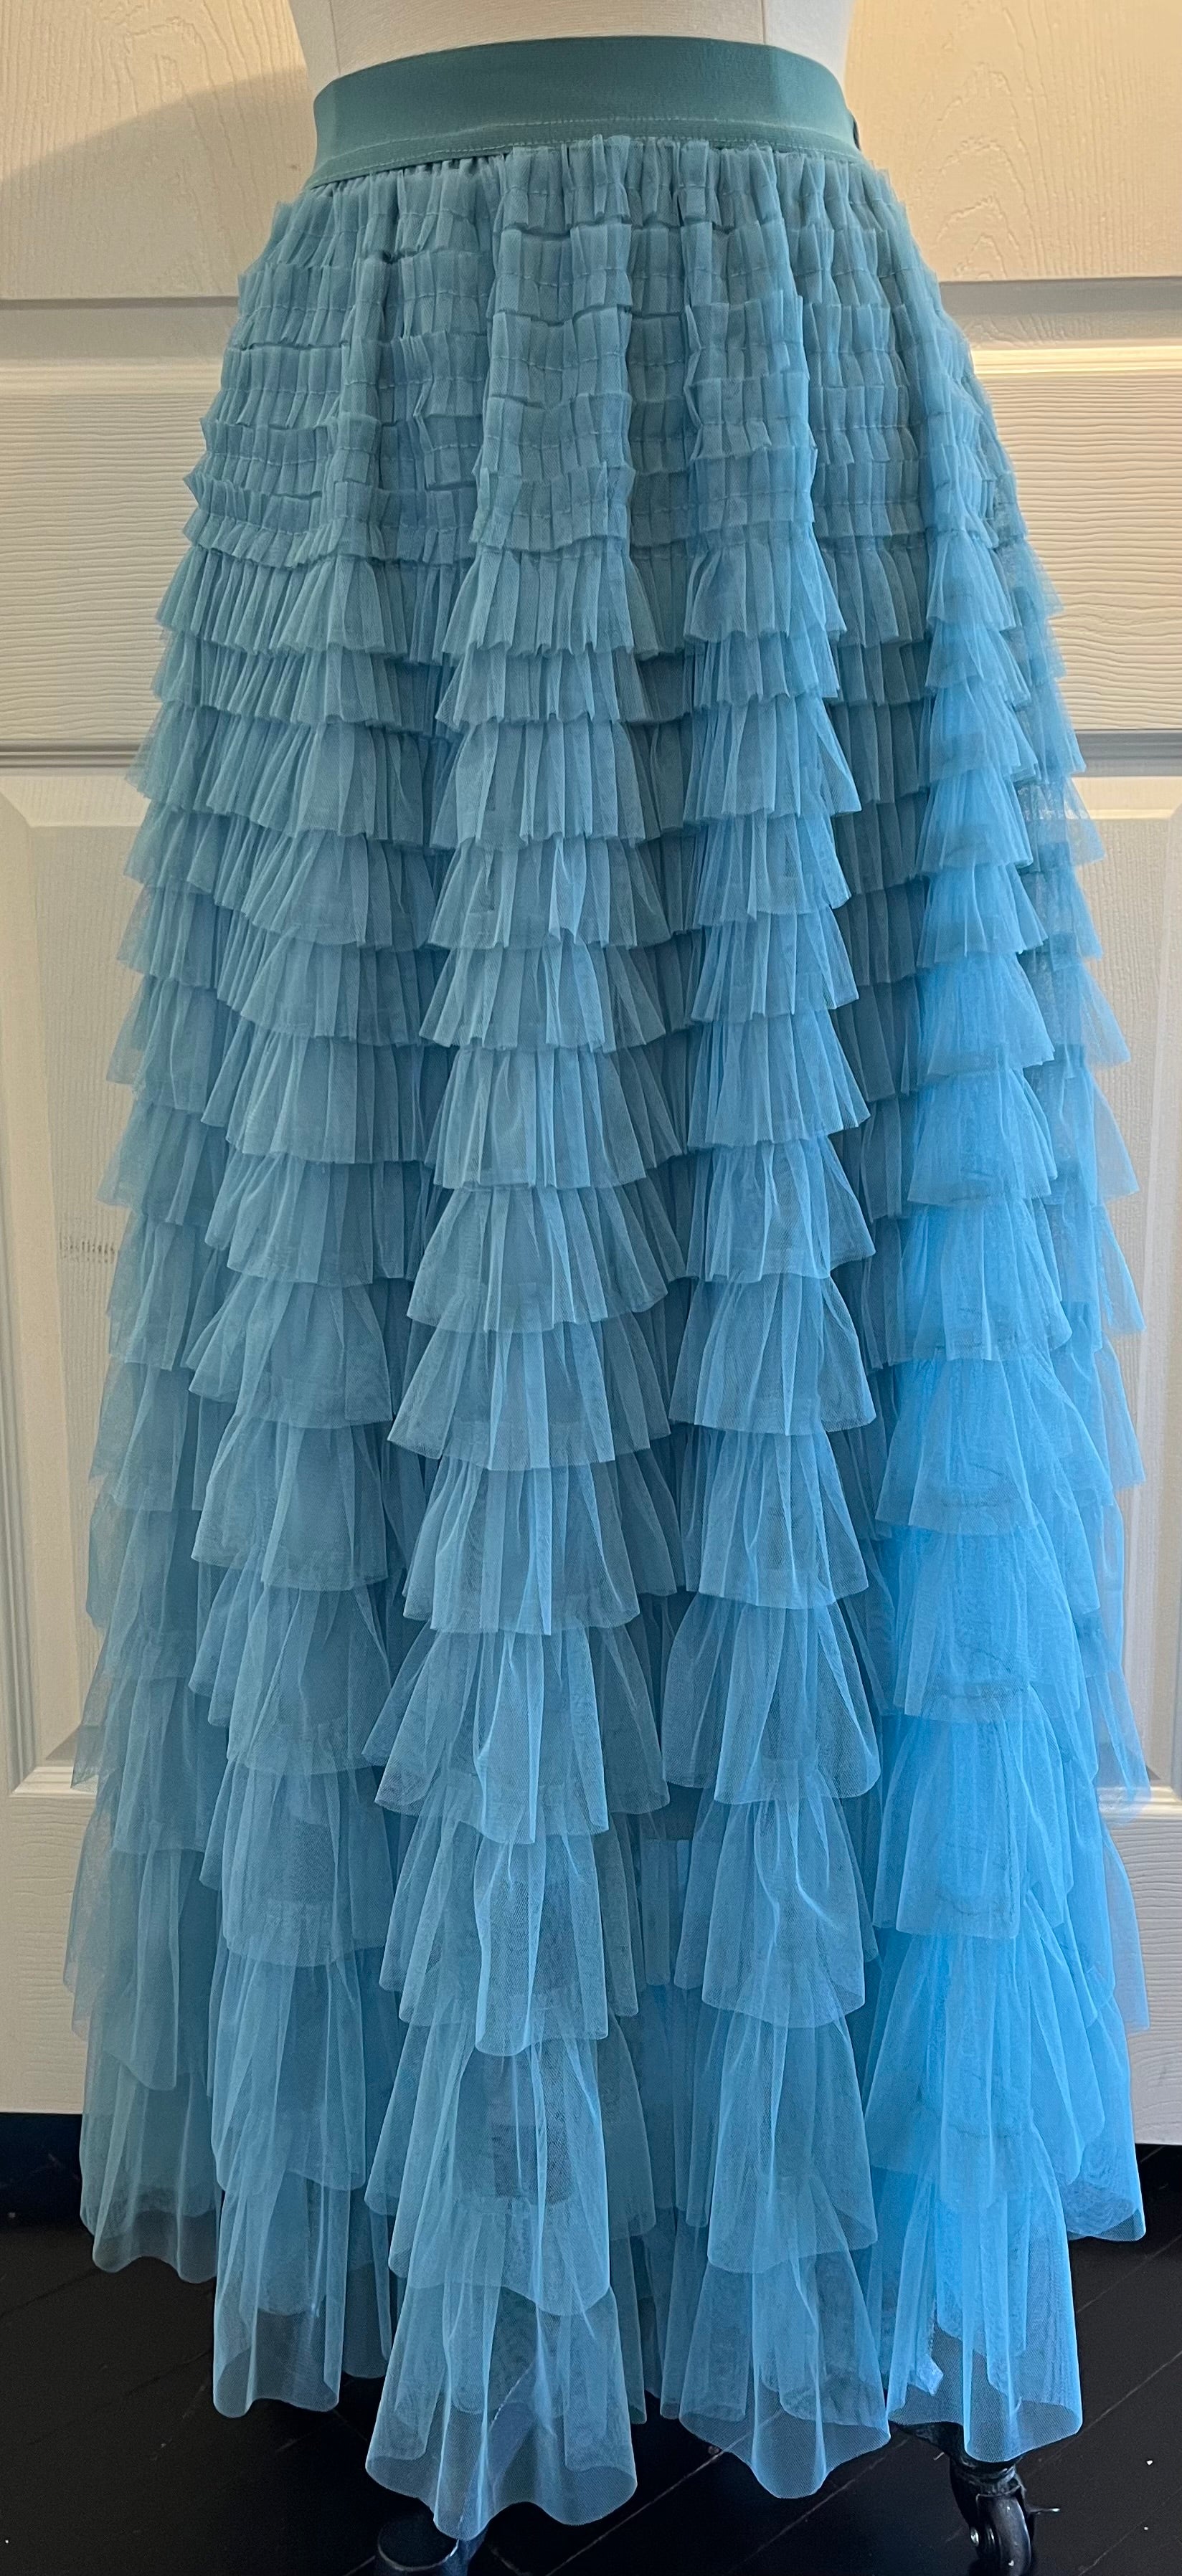 Seafoam Blue Tiered Ankle Length Tulle Skirt